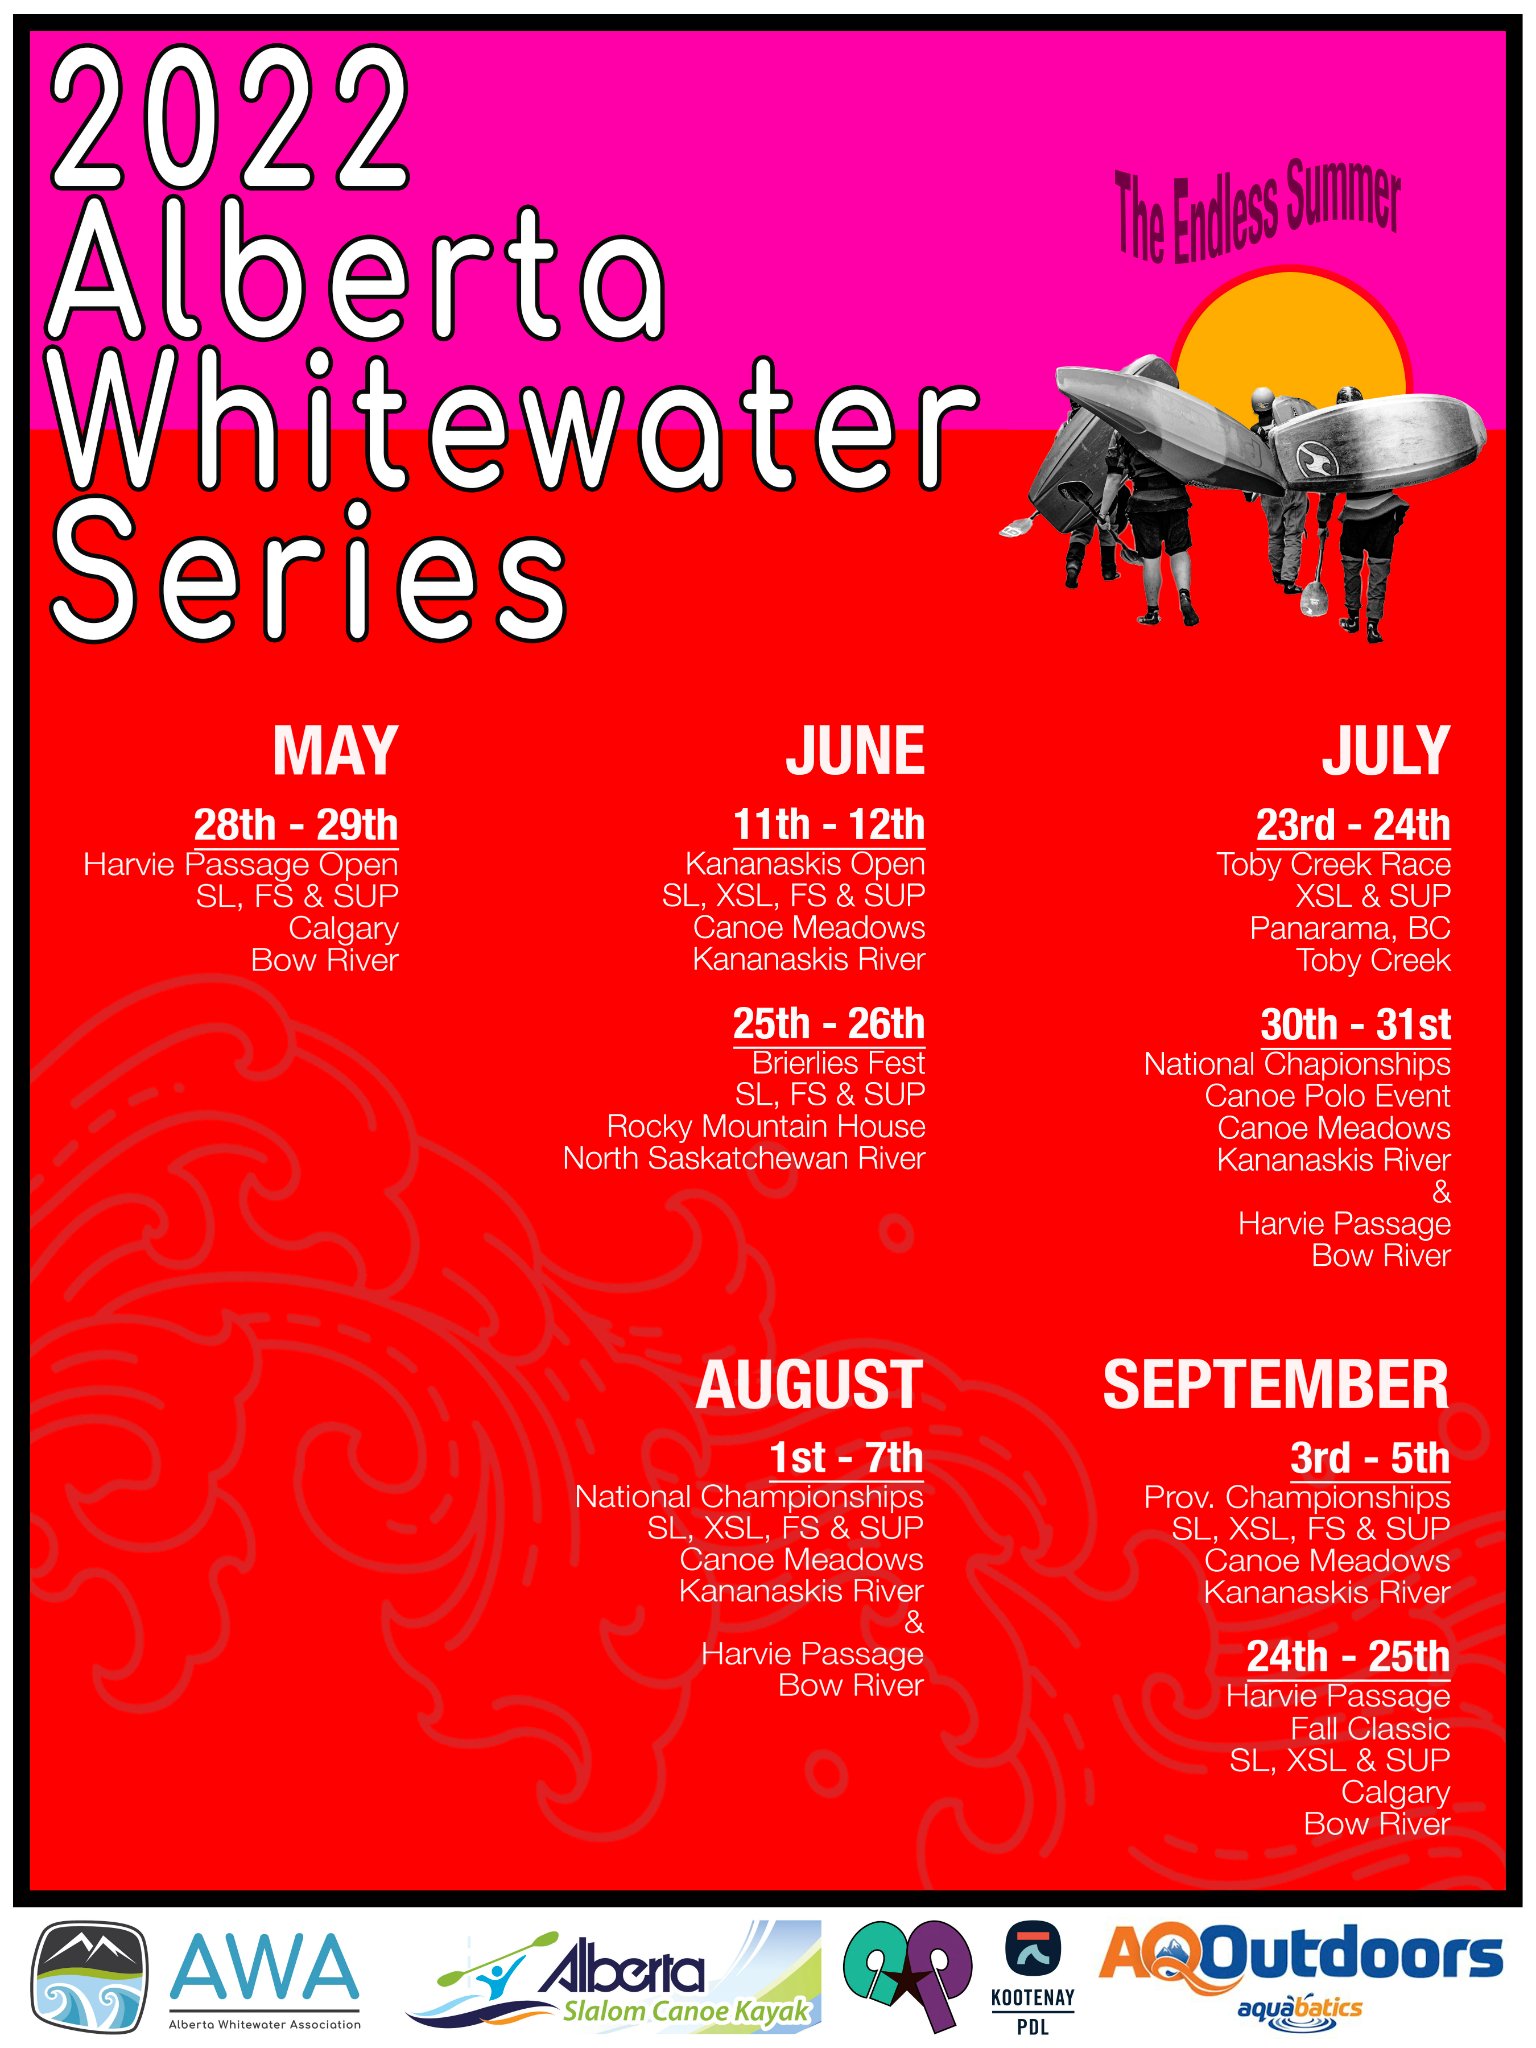 Poster about the 2022 Alberta Whitewater Series